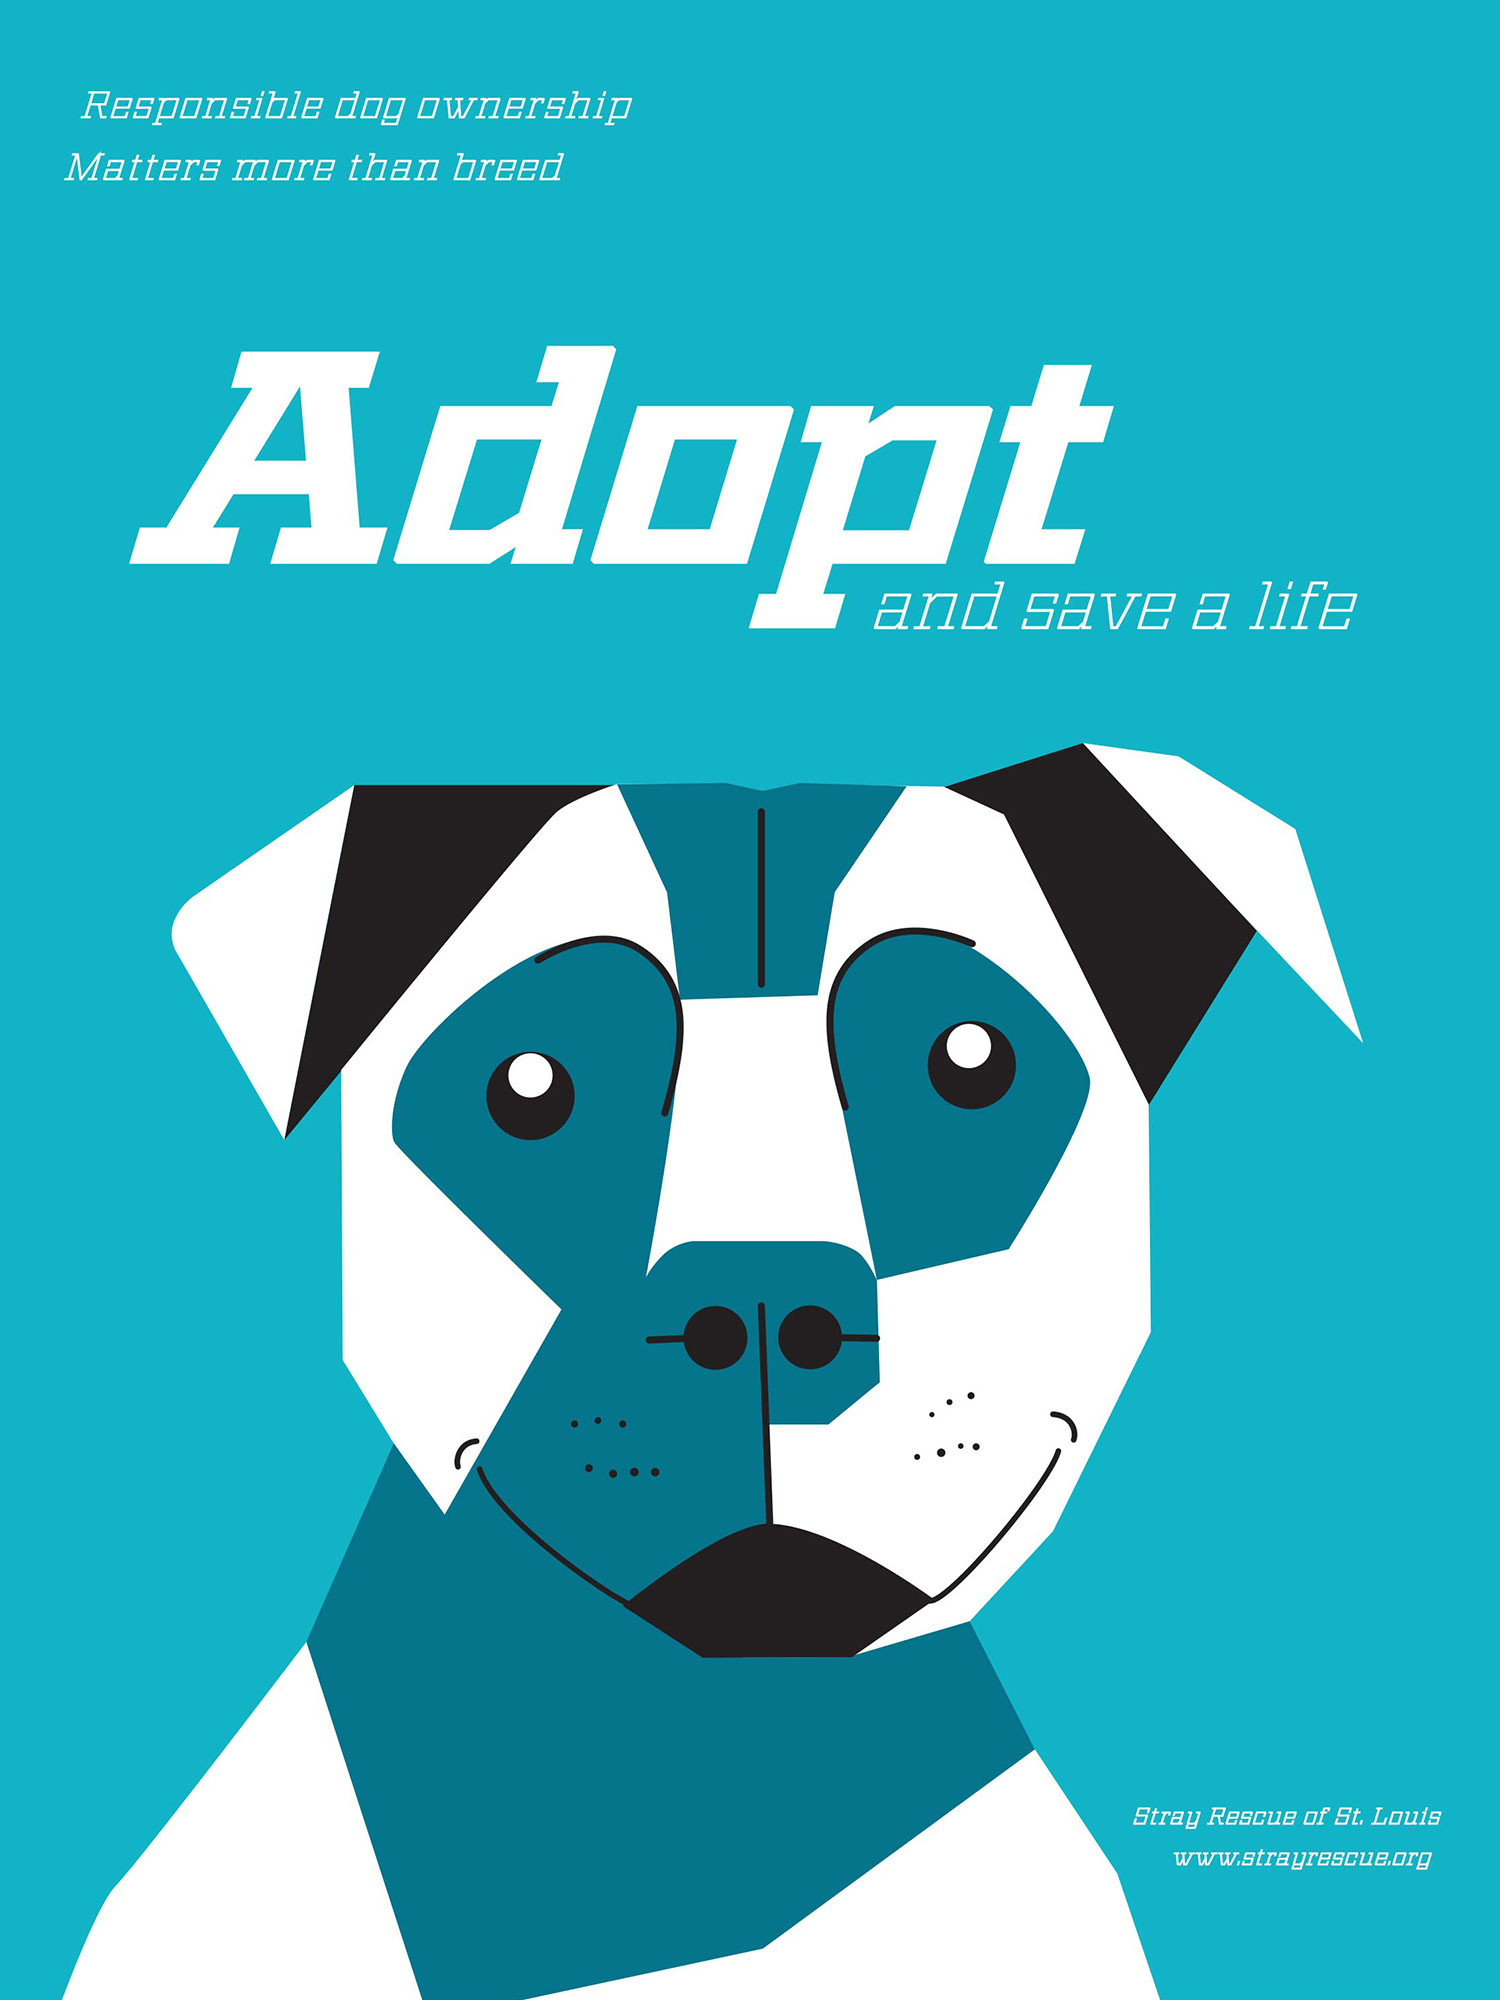 “This was a wonderful opportunity to support one of my favorite organizations, Stray Rescue. I applied the angularity of the Geometric typeface to the illustration of the dog, distilling it into basic shapes. The somewhat silly & playful expression of the pittie demonstrates how loving this breed is, but hopefully conveys the serious message too. Adopt today!”